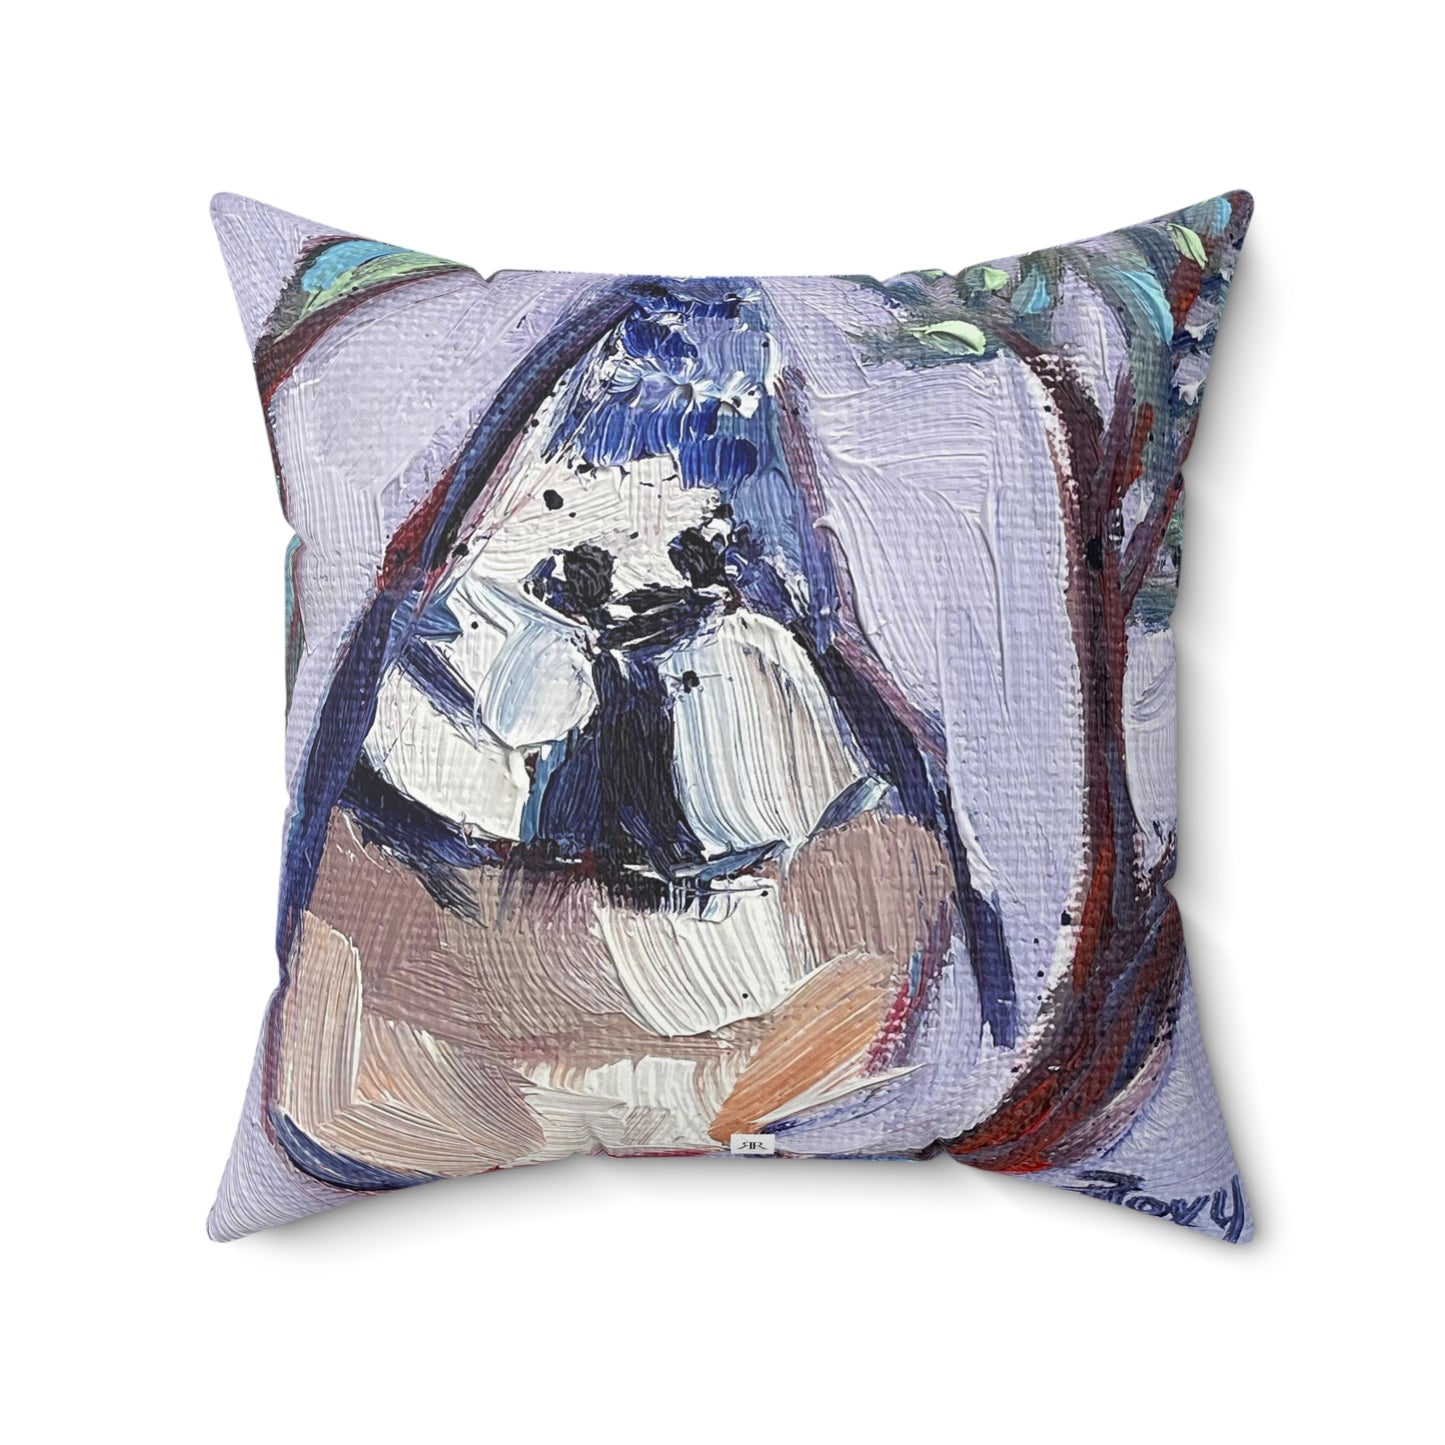 Fat Little Crested Tit Indoor Spun Polyester Square Pillow